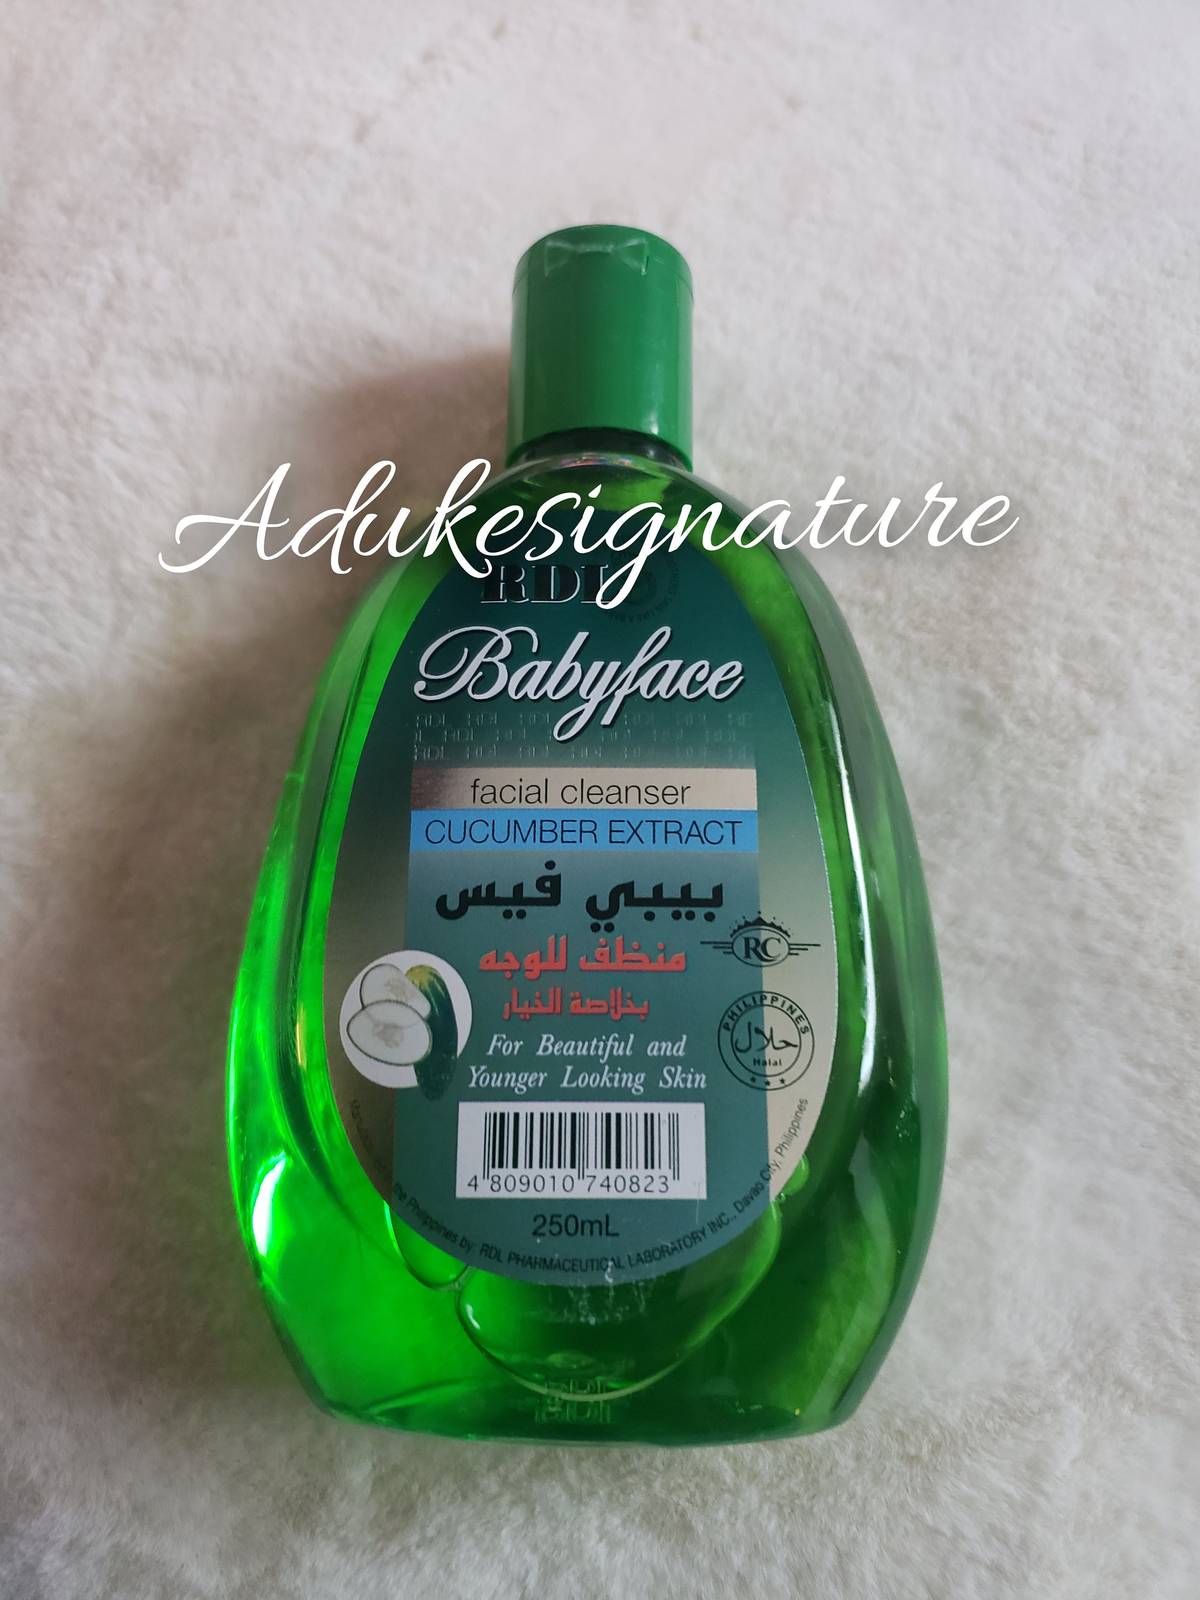 Rdl babyface cucumber extract facial cleanser